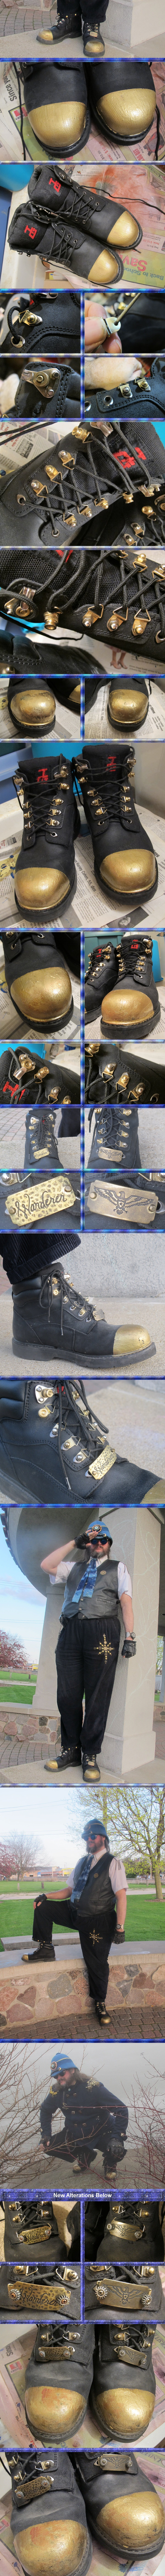 Brass-Fitted Boots Mark III